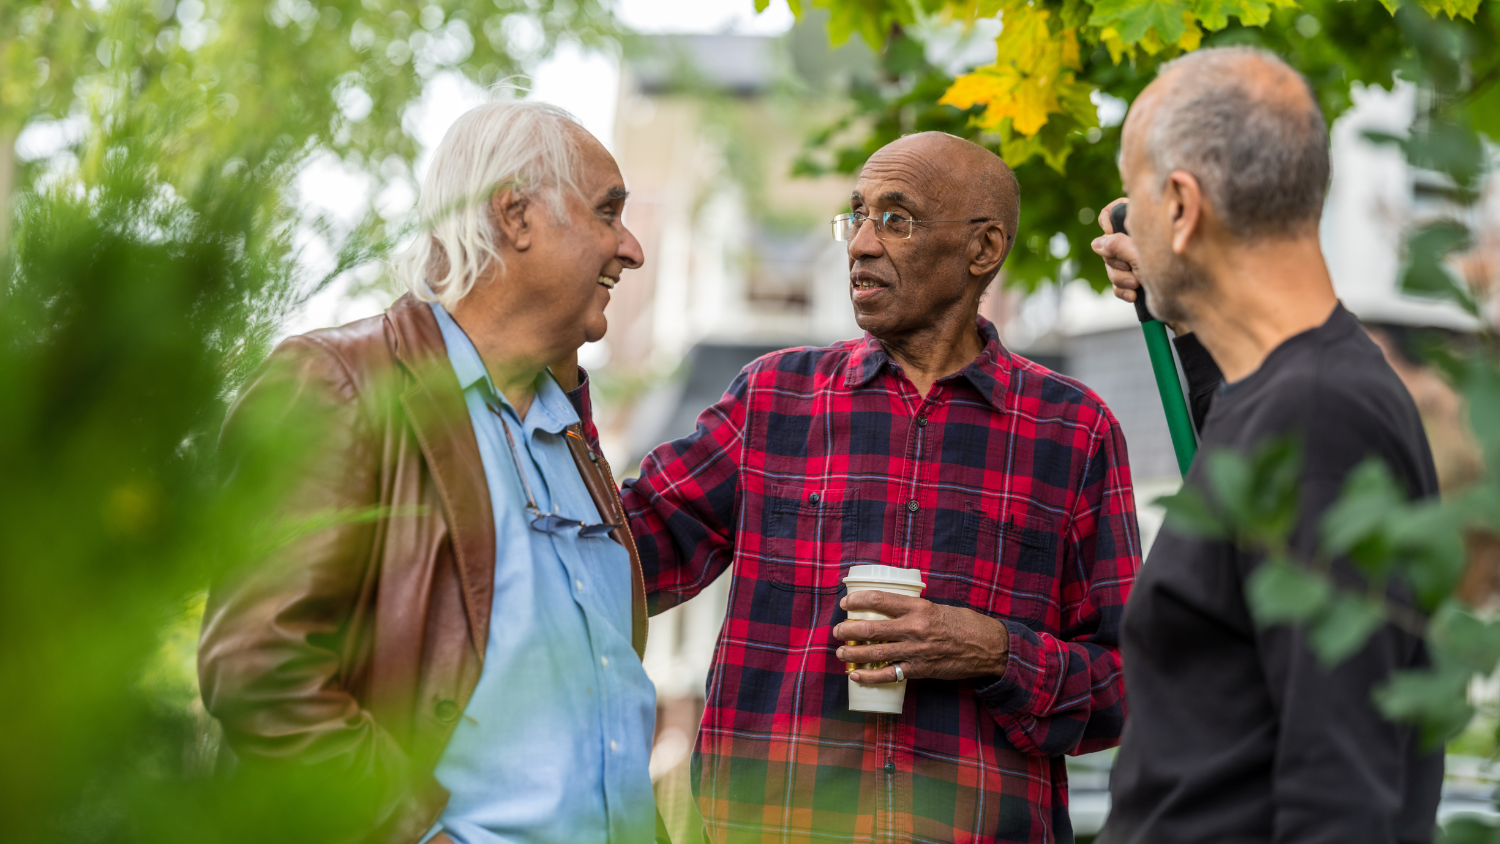 Three neighbors chat in a driveway.